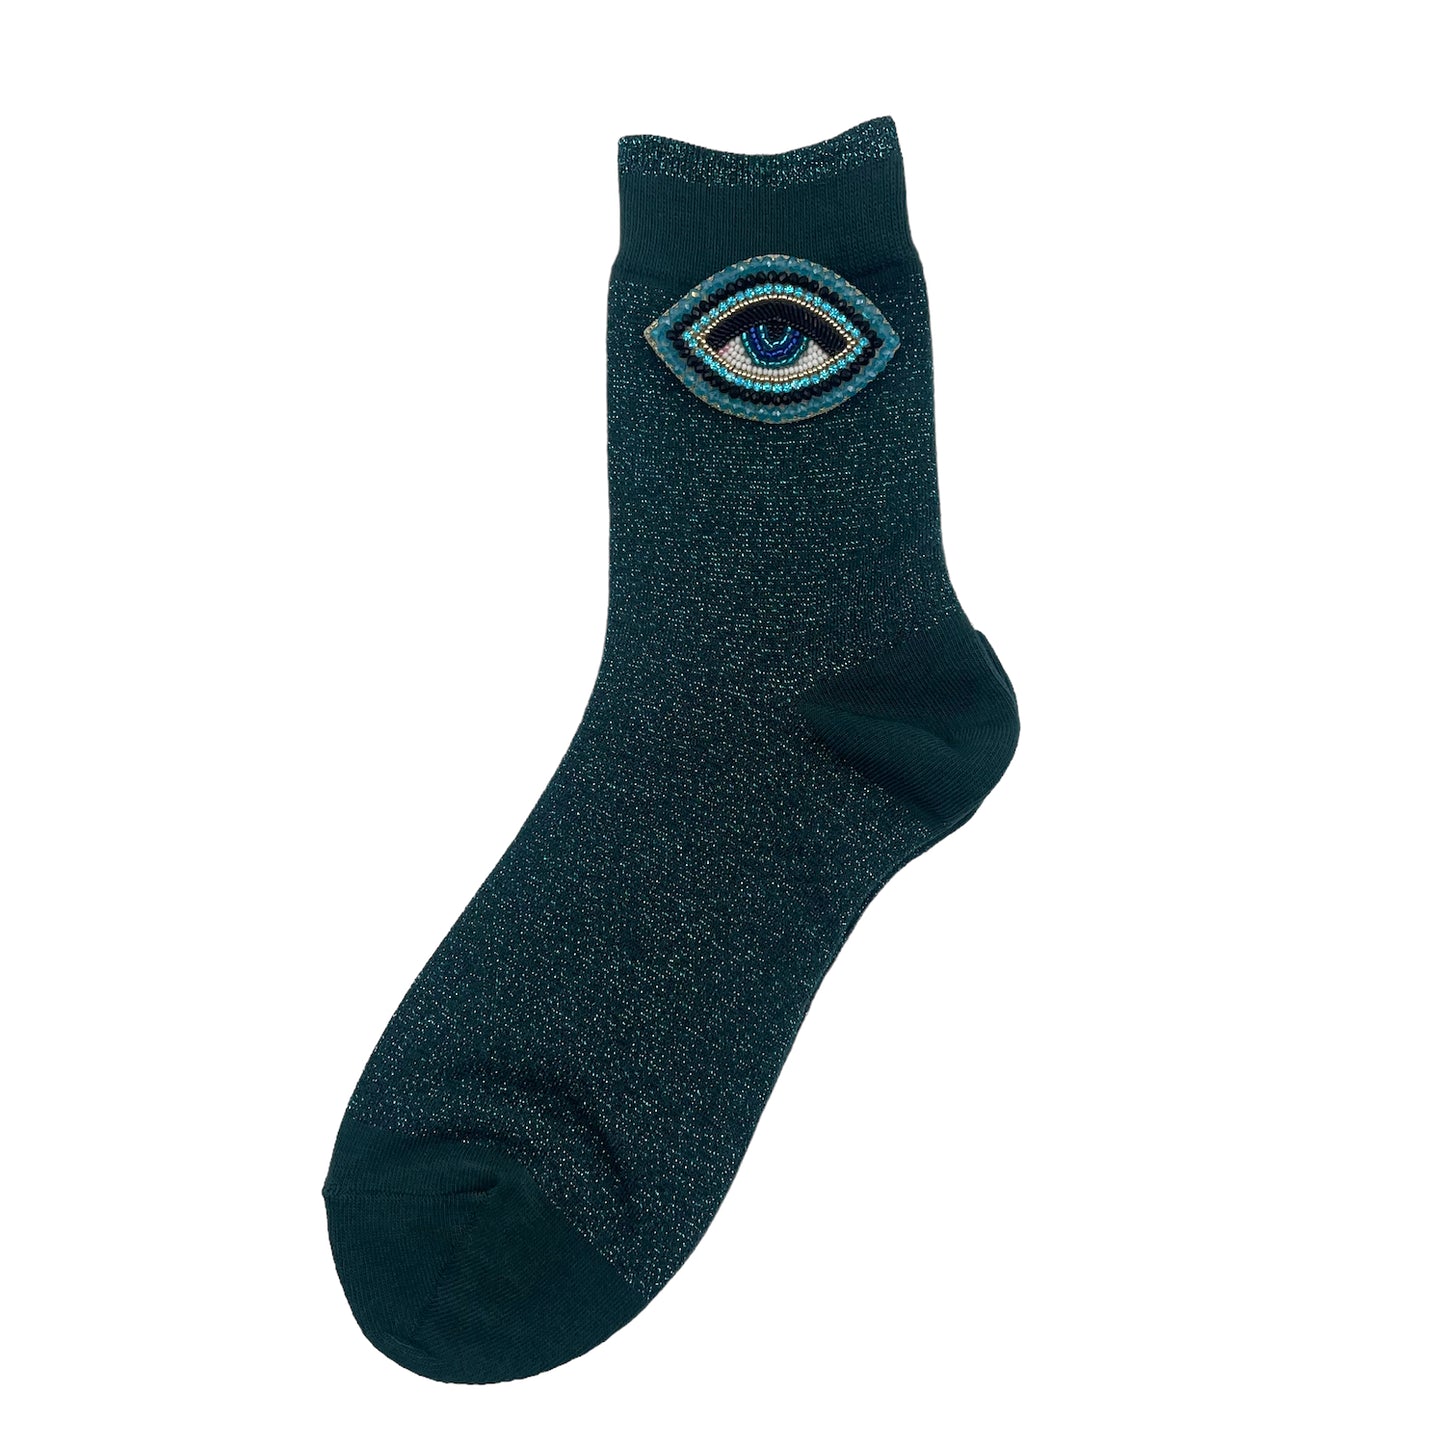 Tokyo socks in teal with a turquoise eye brooch